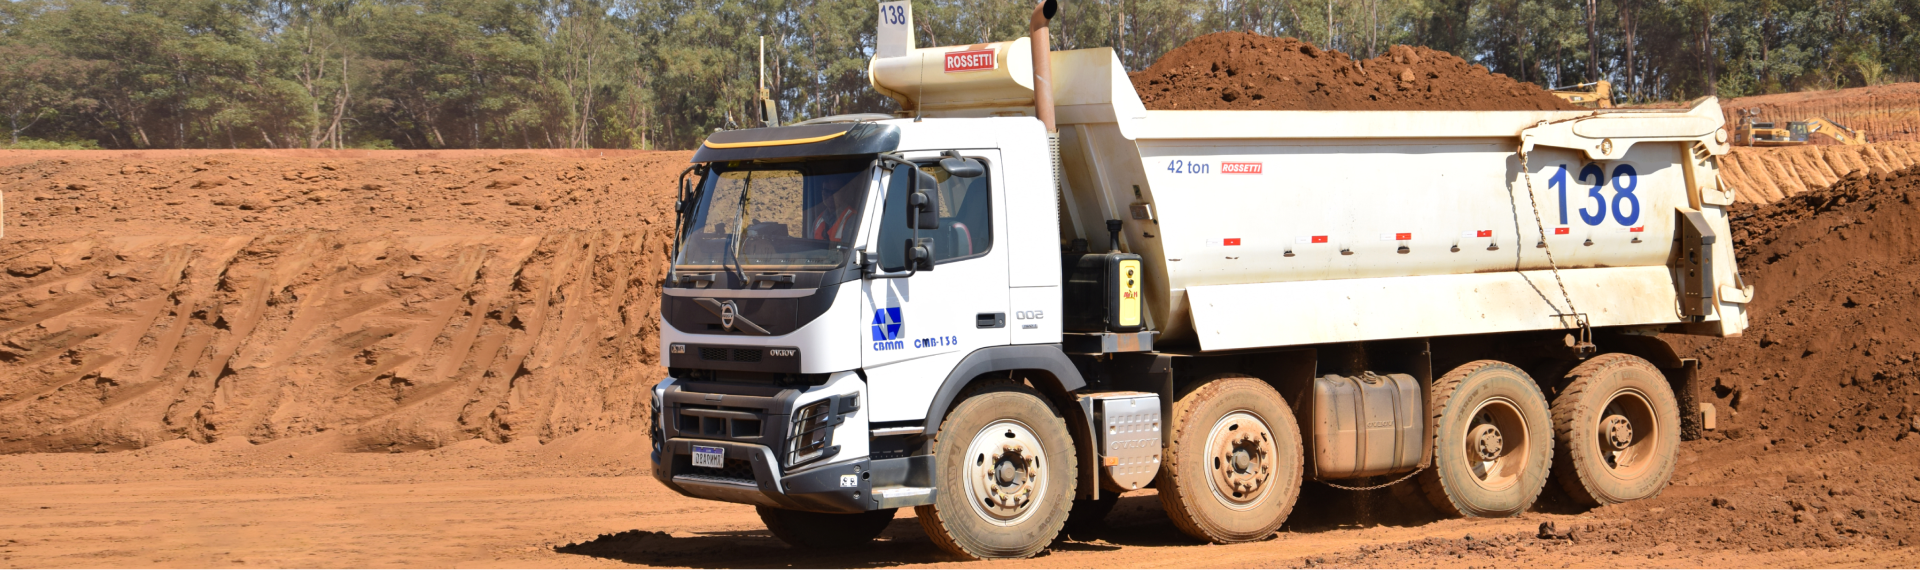 Dump truck with body in Hardox® 500 Tuf steel travelling along the road.